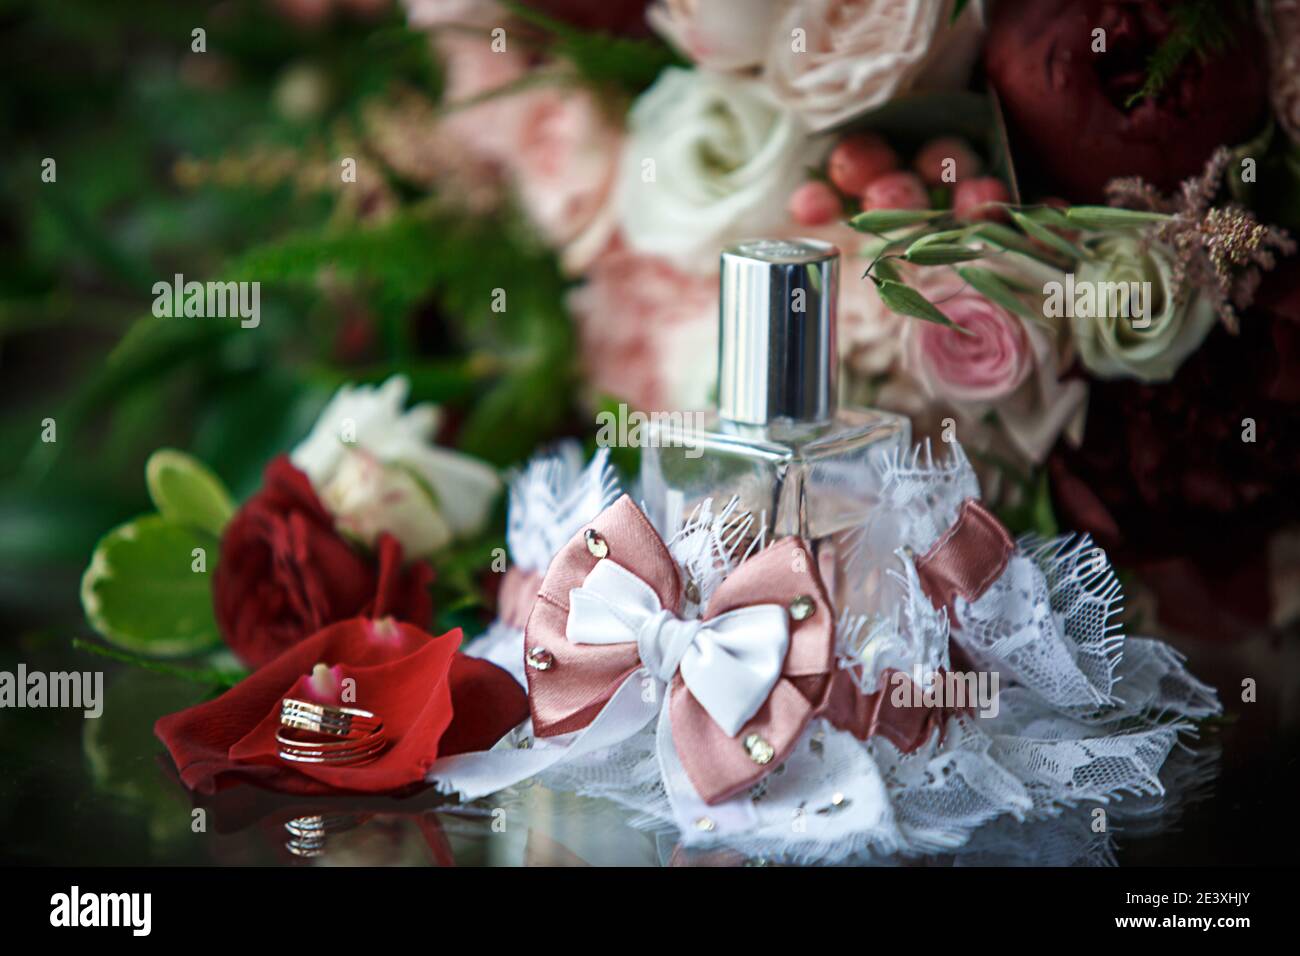 Wedding accessories for the bride and groom: a bouquet of red, pink and white roses, a boutonniere, gold wedding rings, a lace garter with a bow, perf Stock Photo